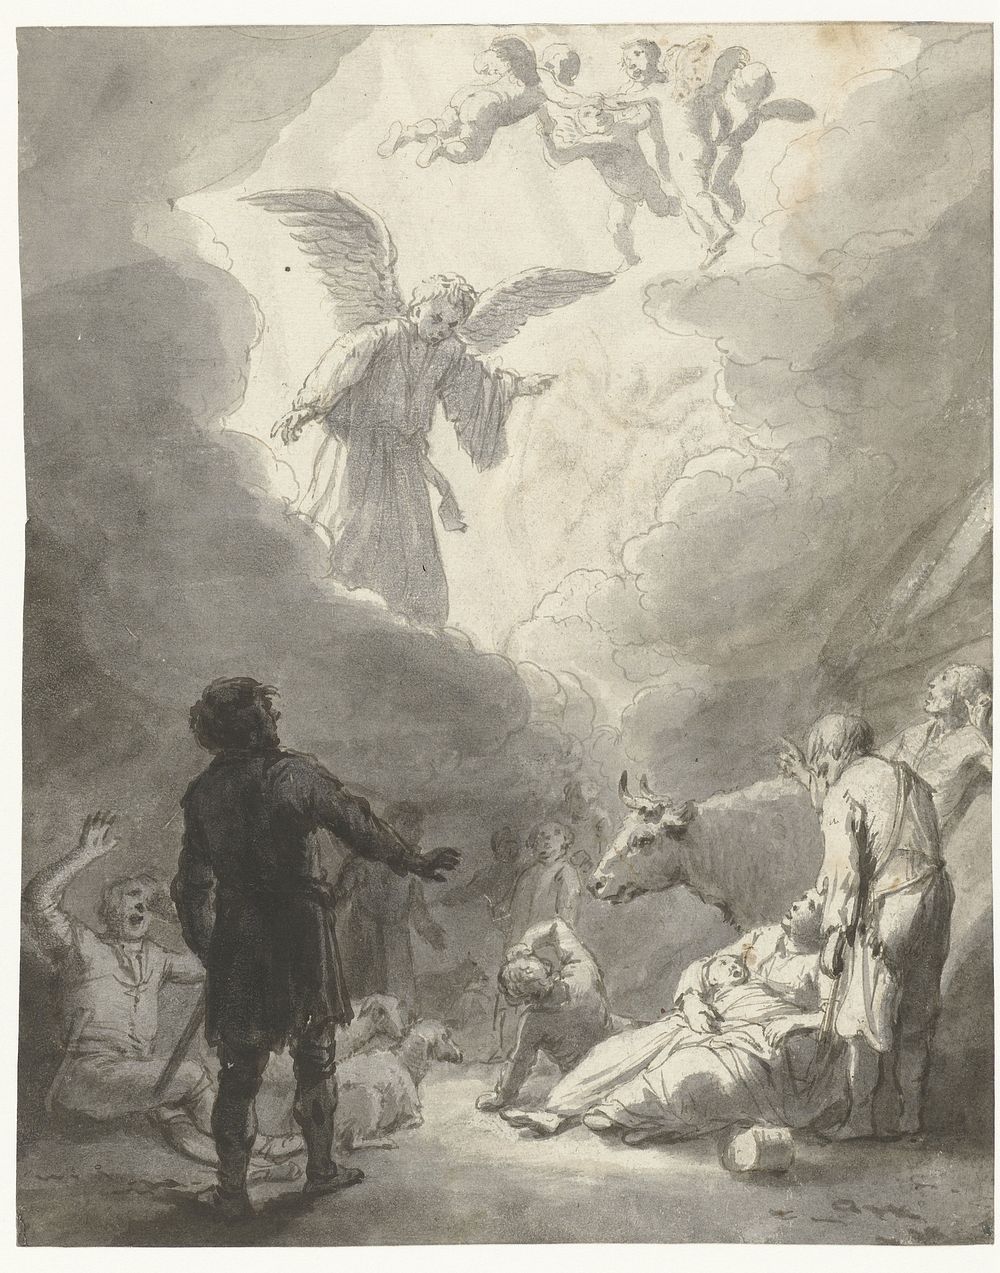 The Annunciation to the Shepherds (c. 1633 - c. 1637) by Claes Moeyaert